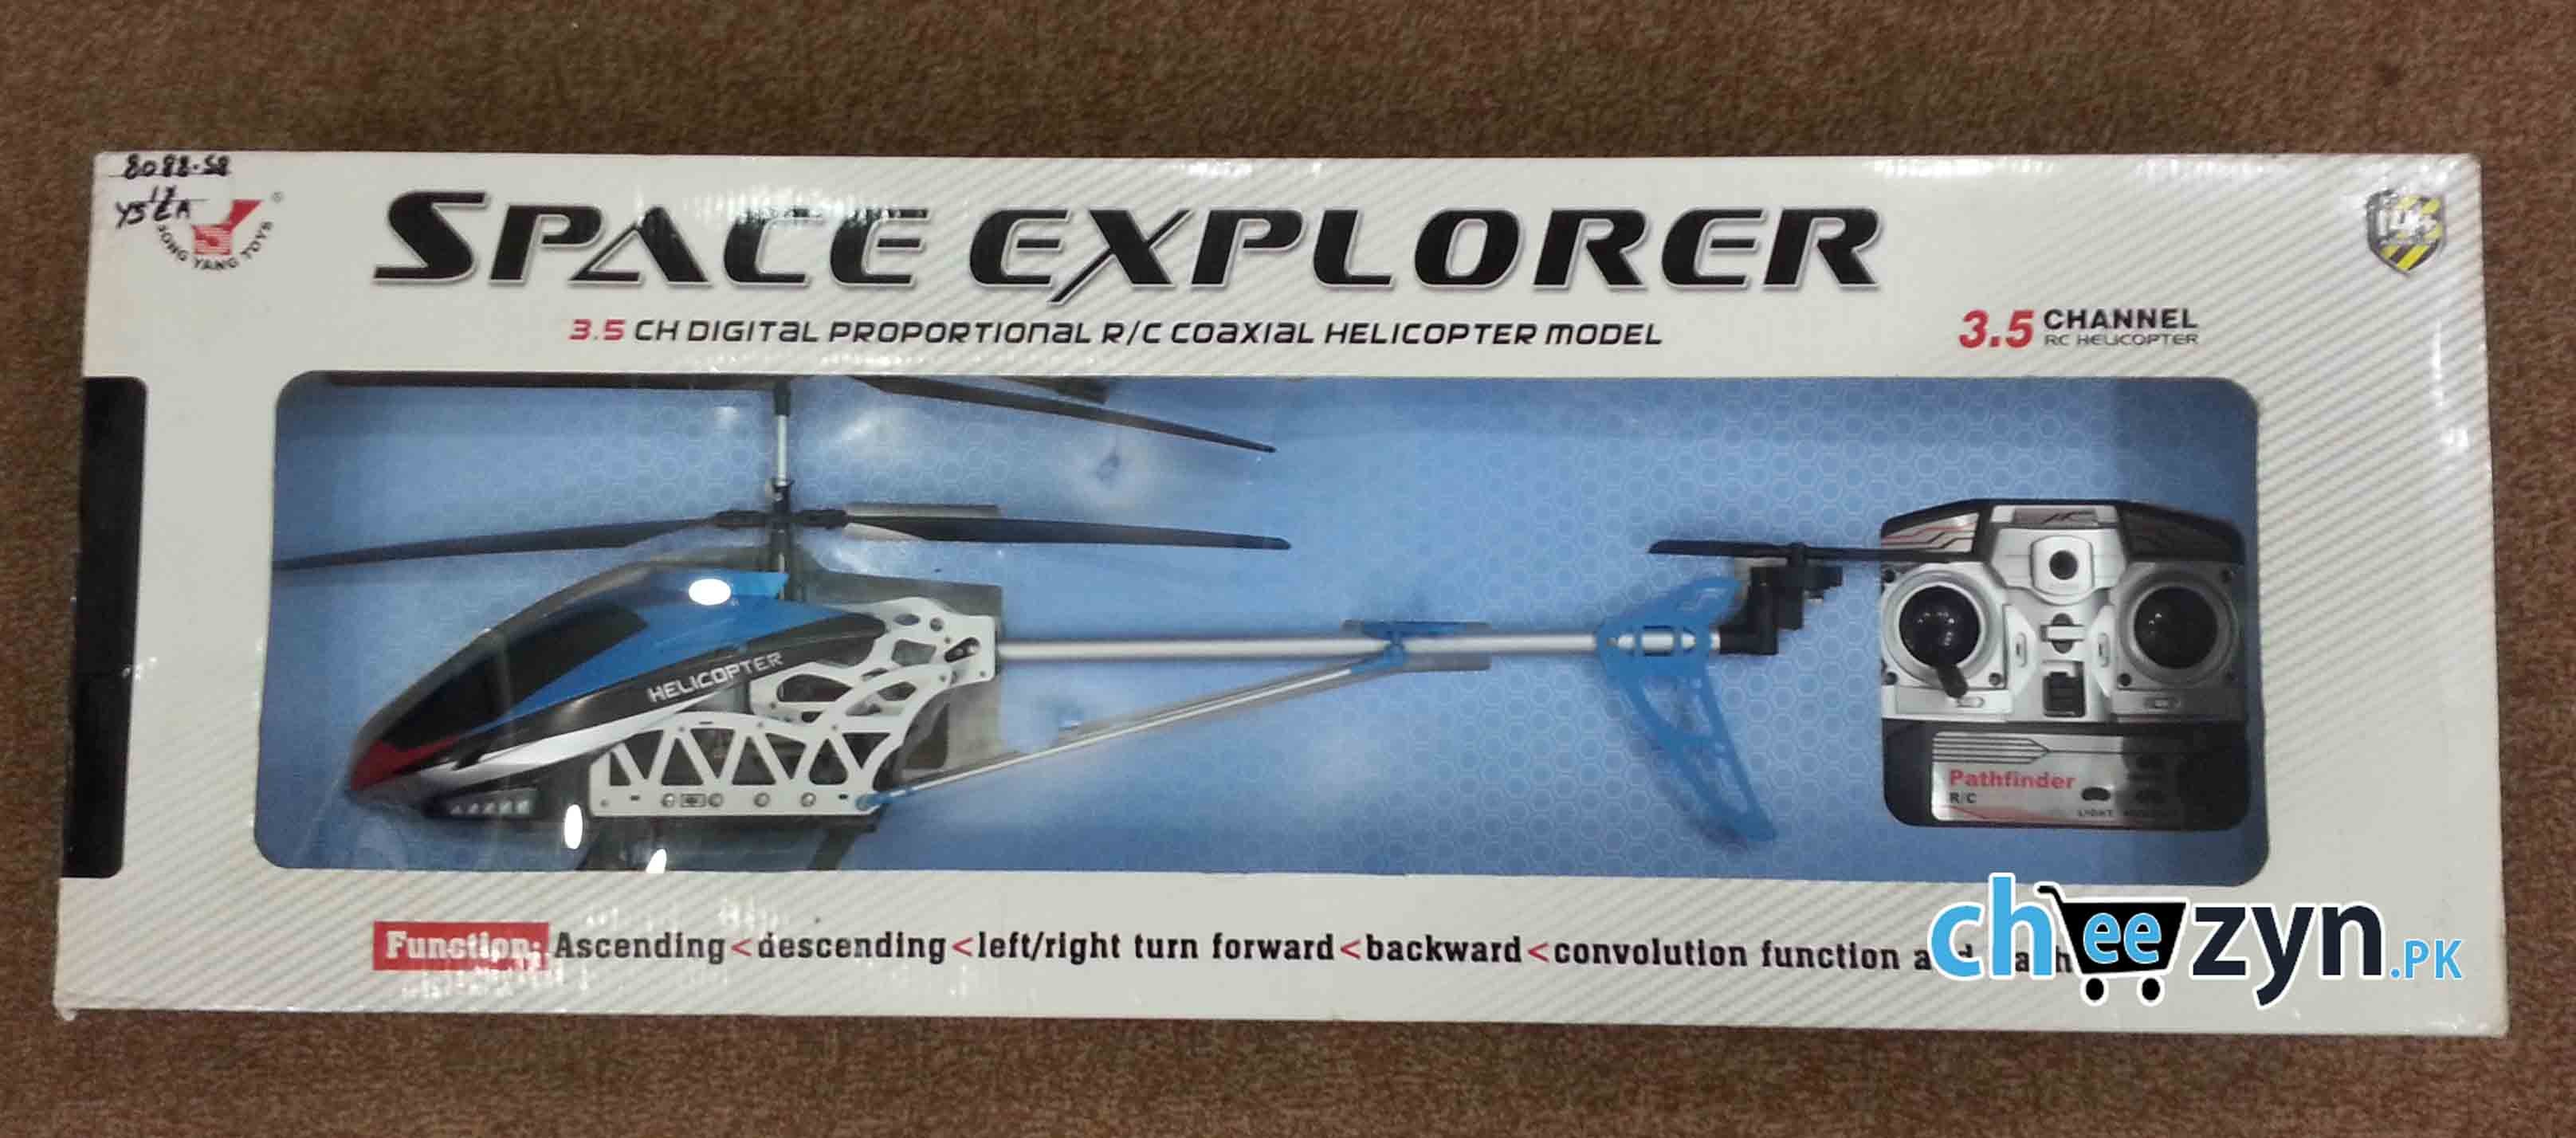 space explorer helicopter 3.5 channel